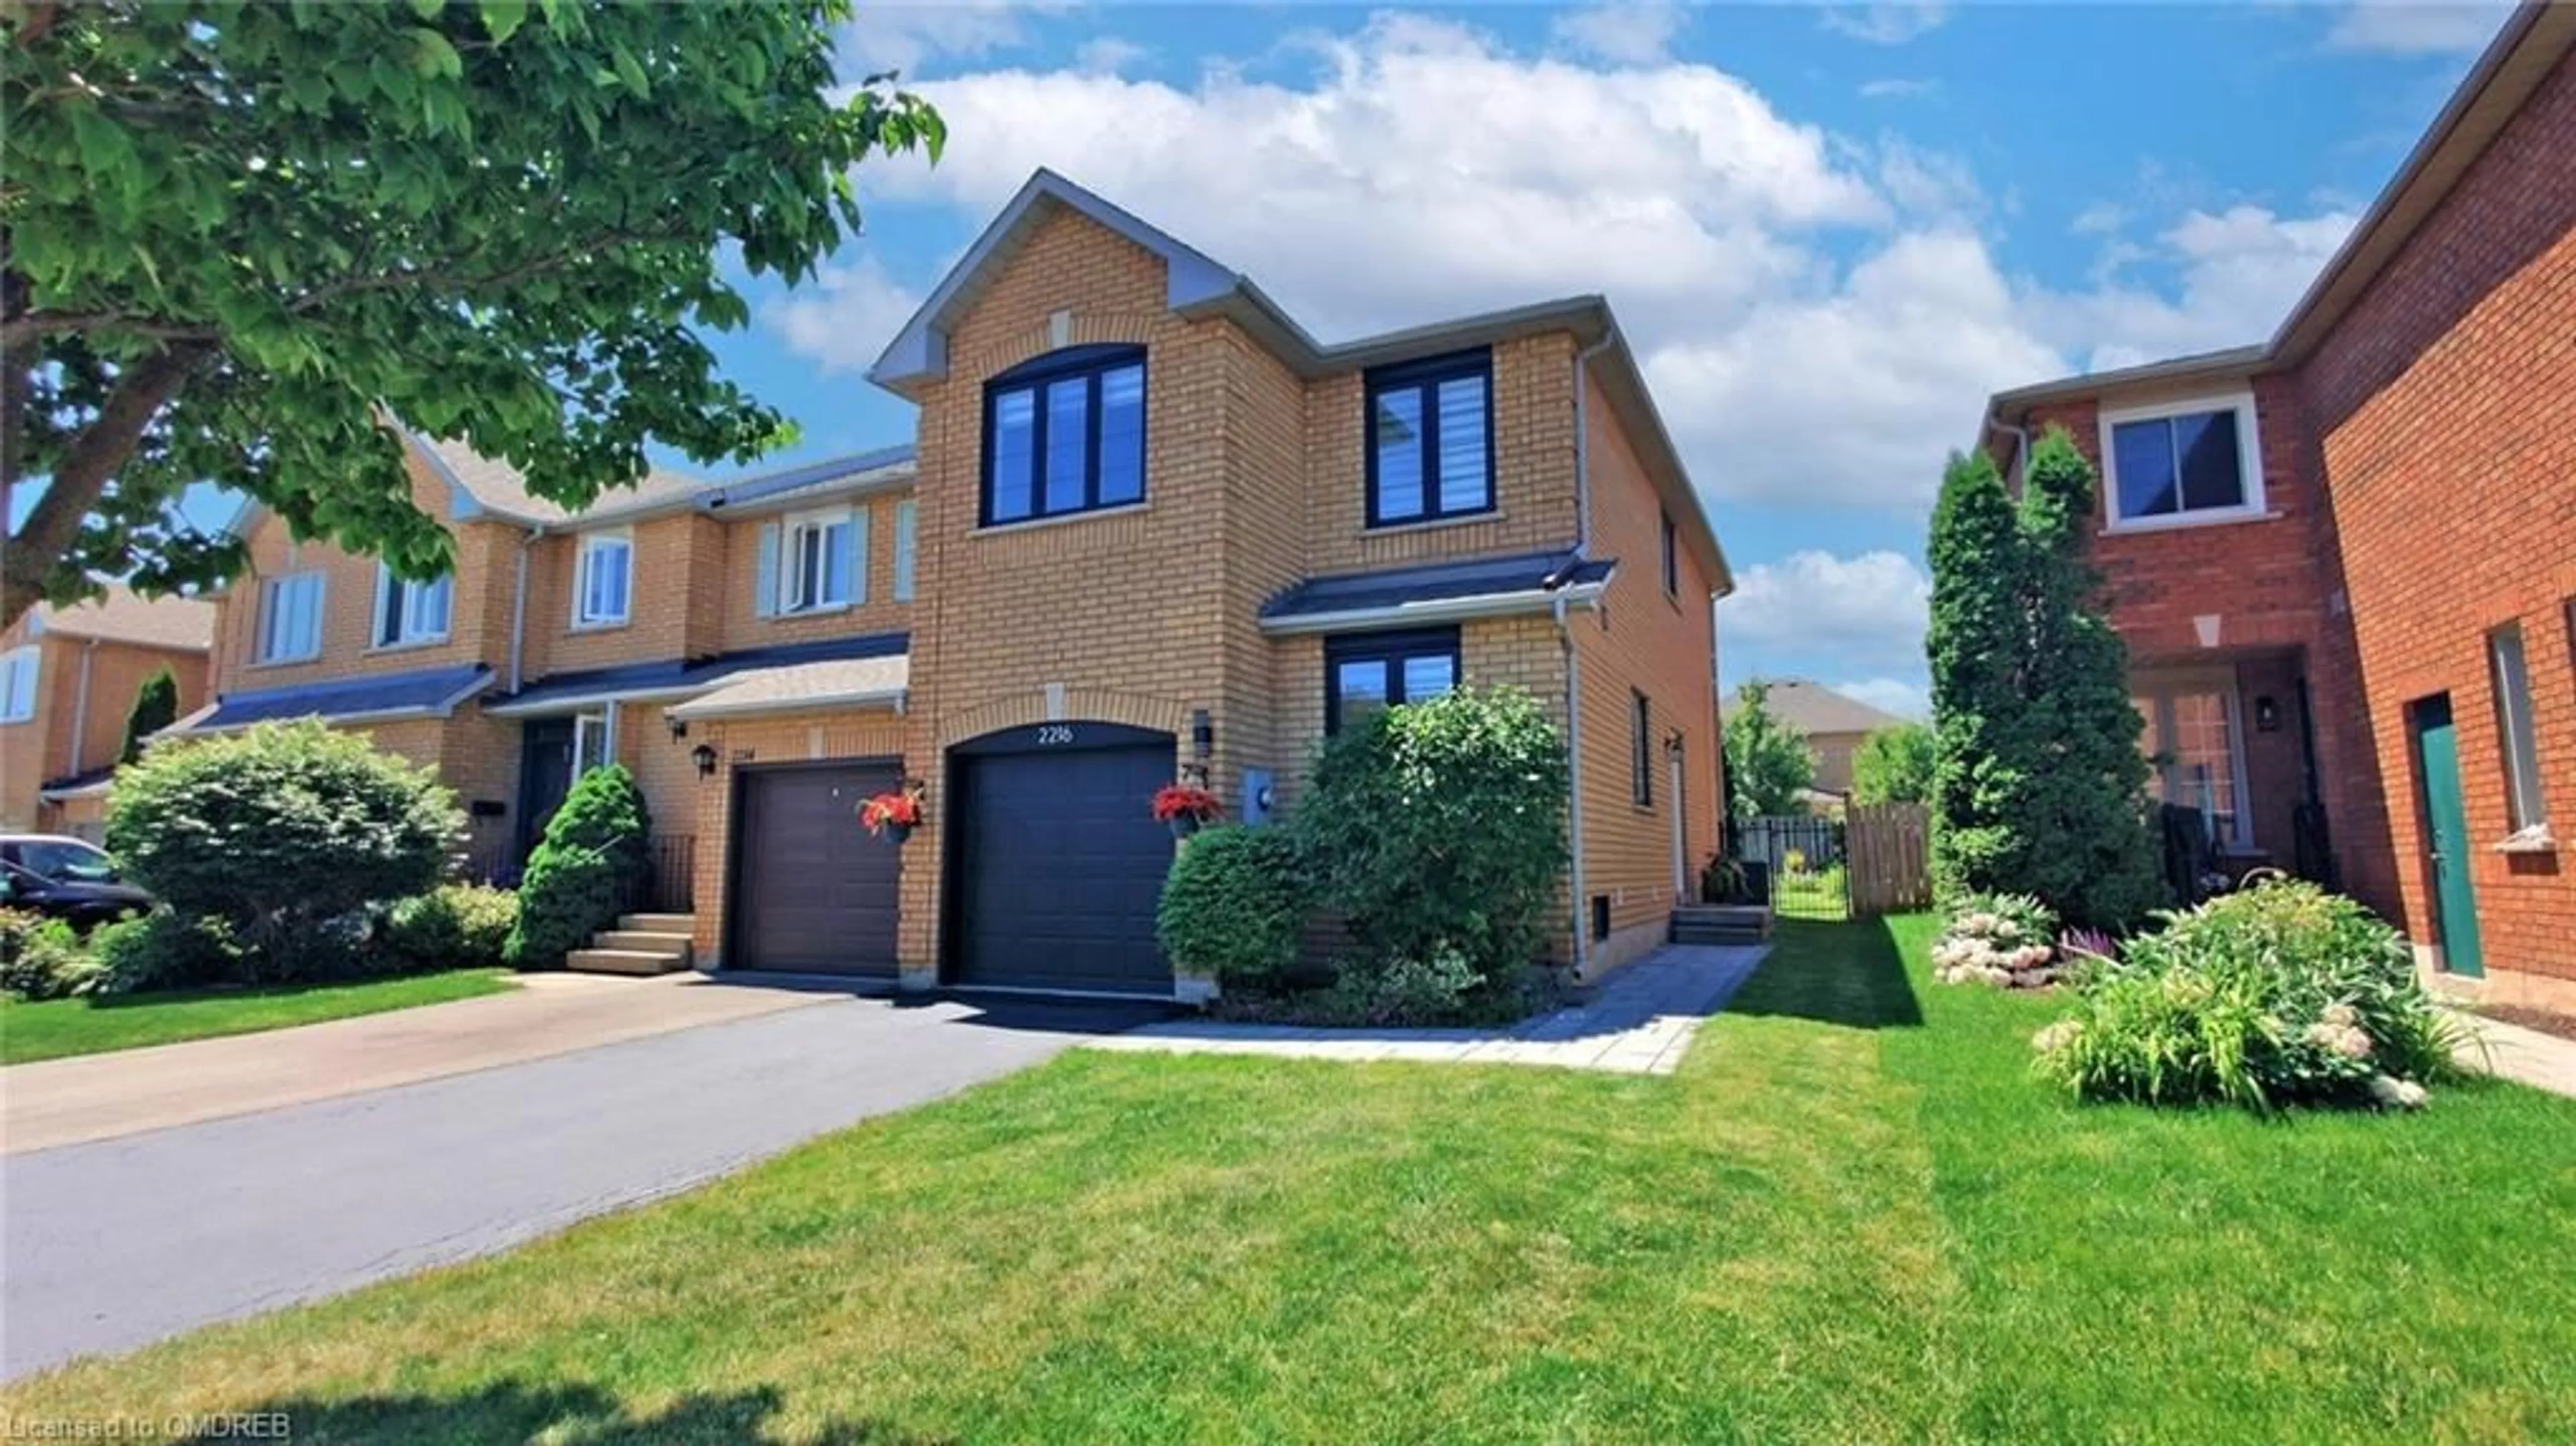 A pic from exterior of the house or condo for 2216 Dale Ridge Dr, Oakville Ontario L6M 3L4